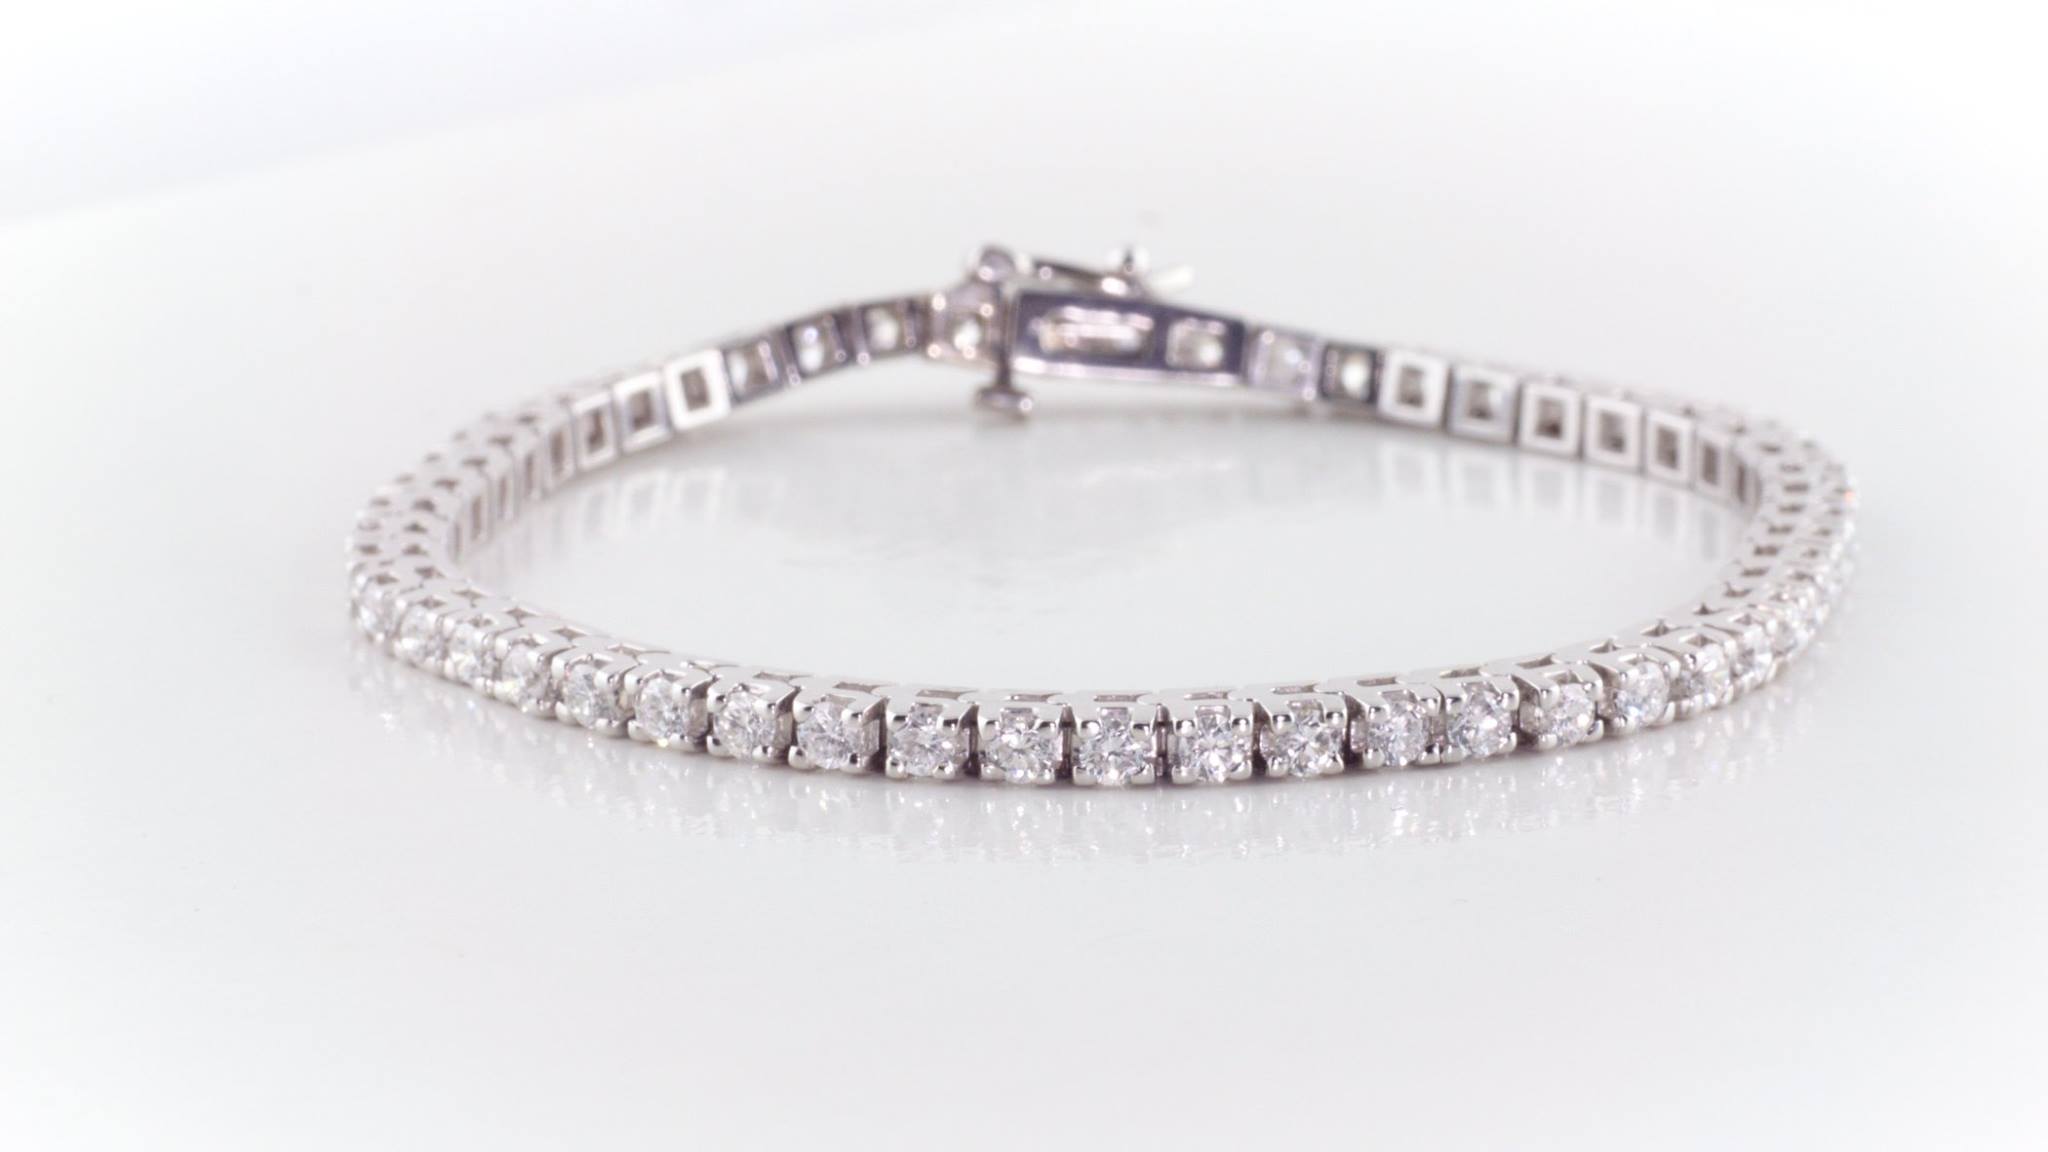 The Tennis Bracelet and its History